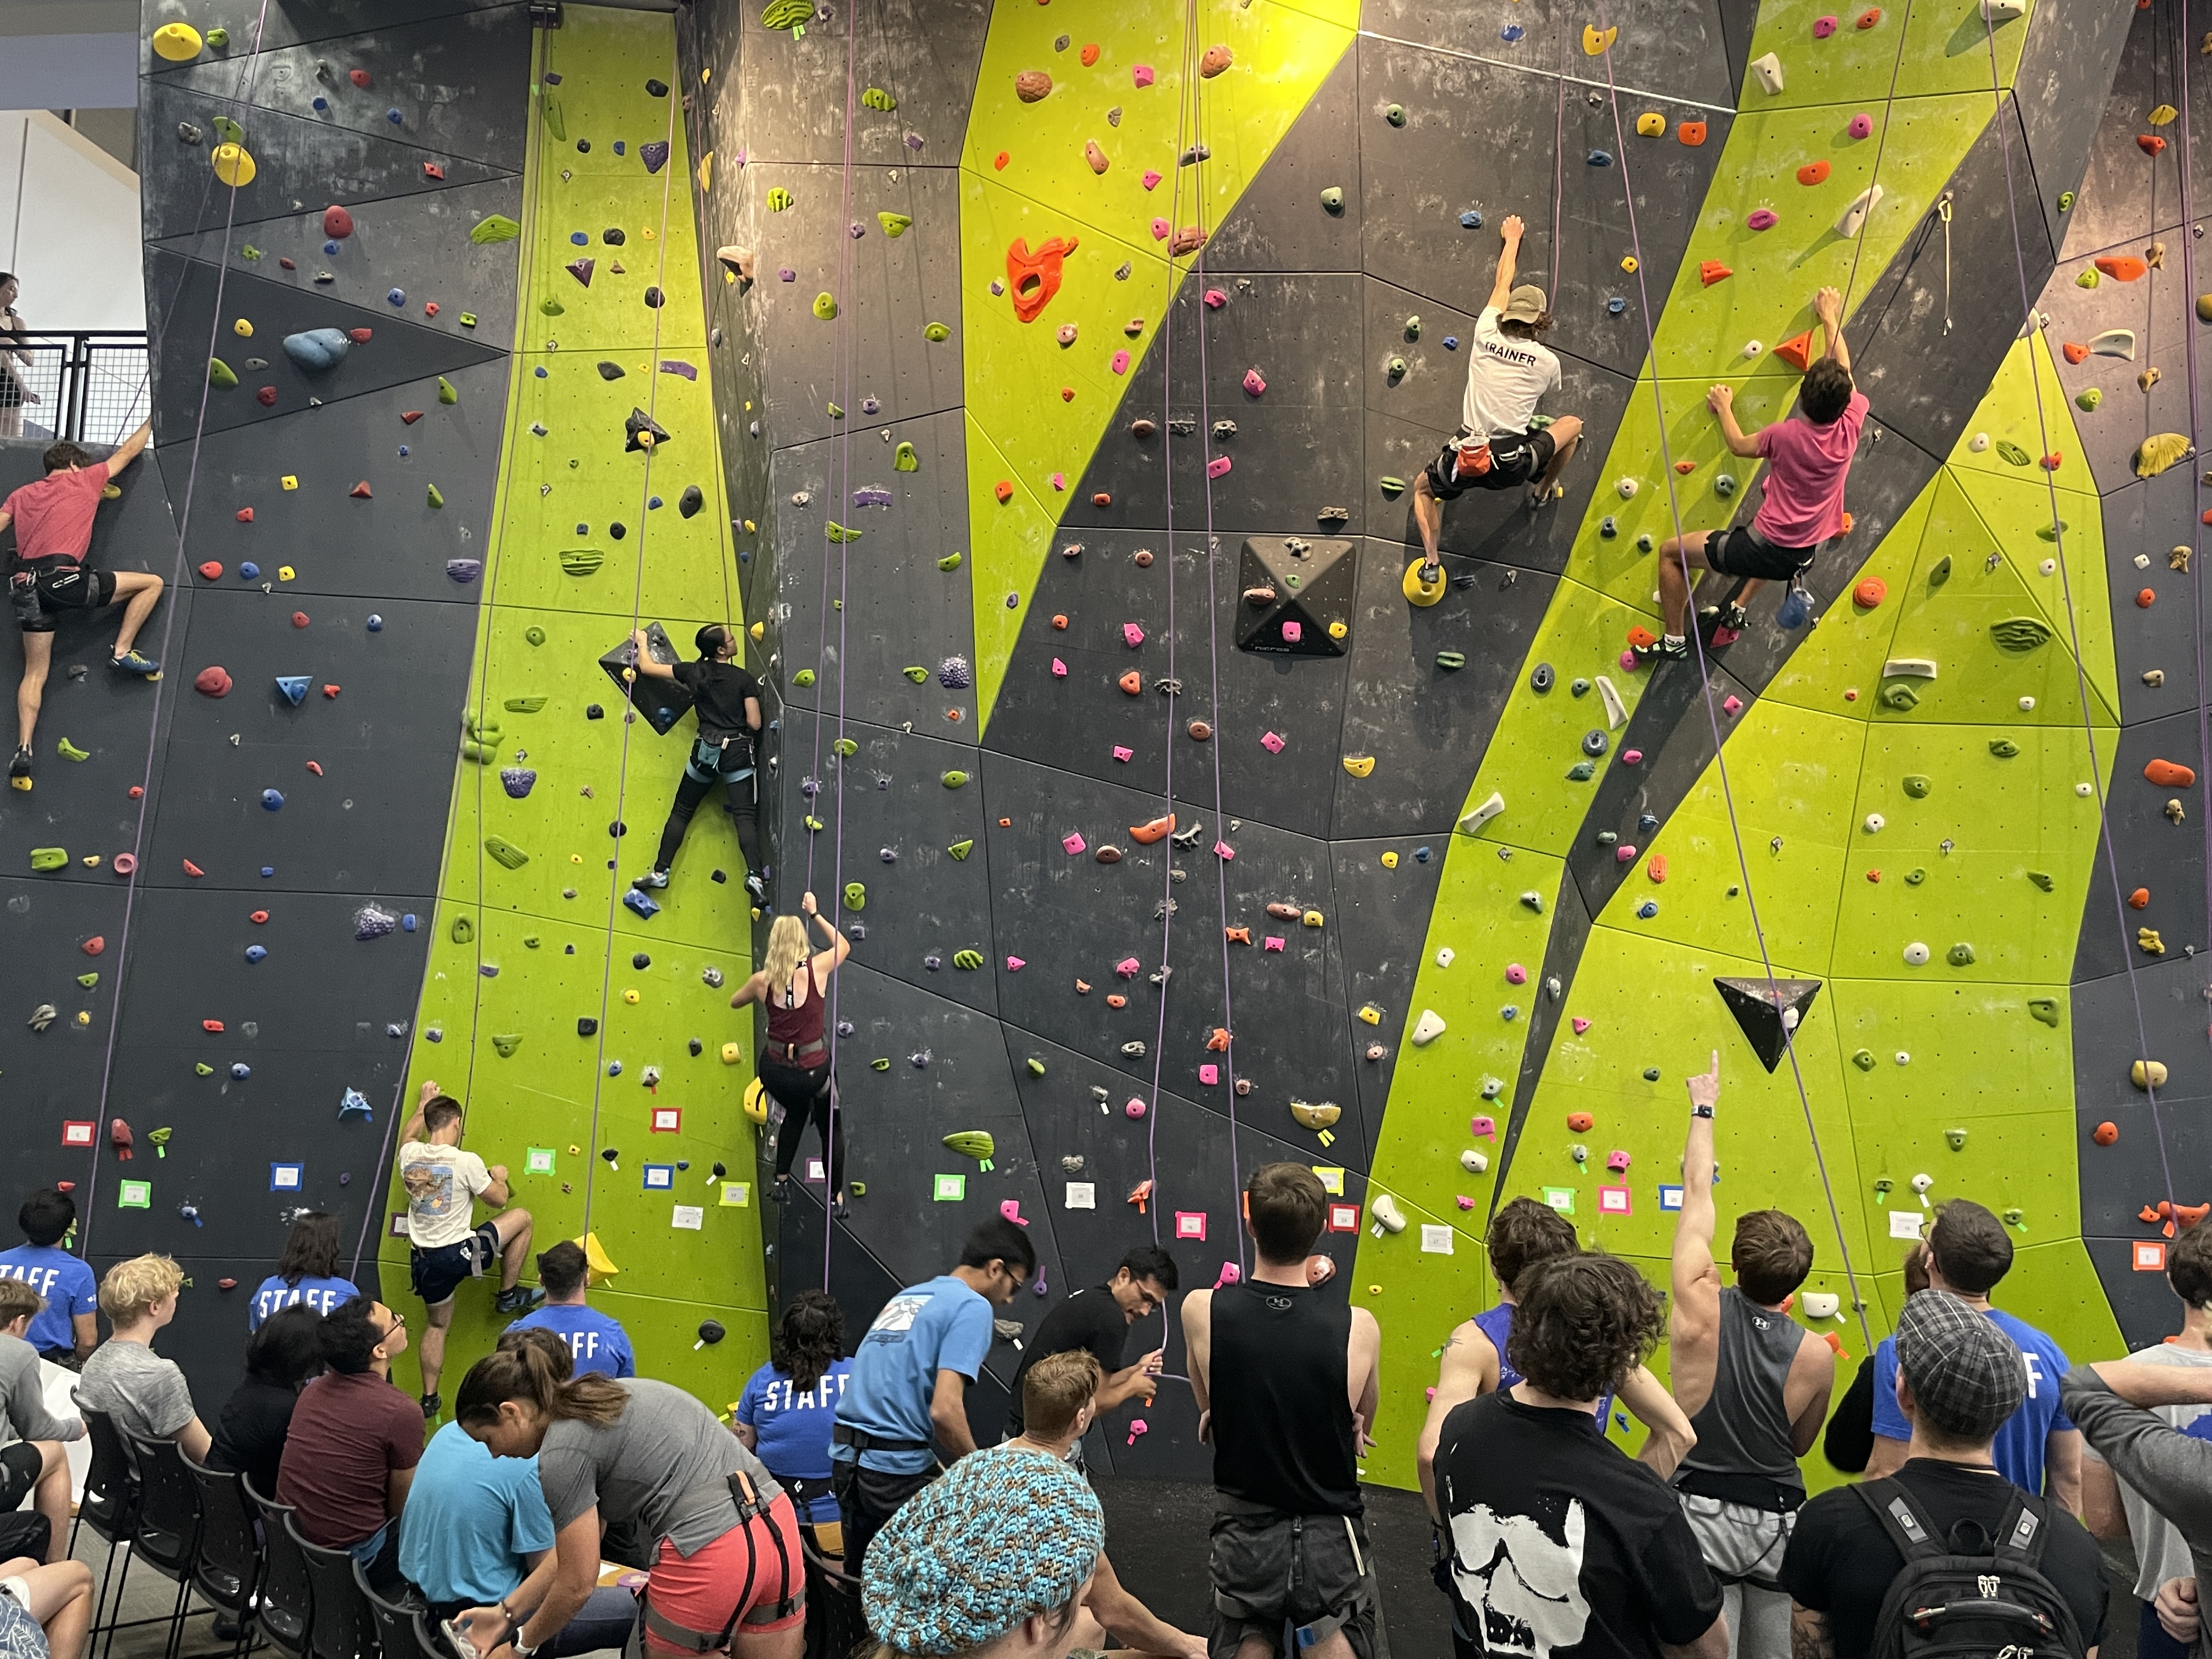 Multiple individuals participating in climbing. Five people are actively climbing on the wall while a crowd below watches